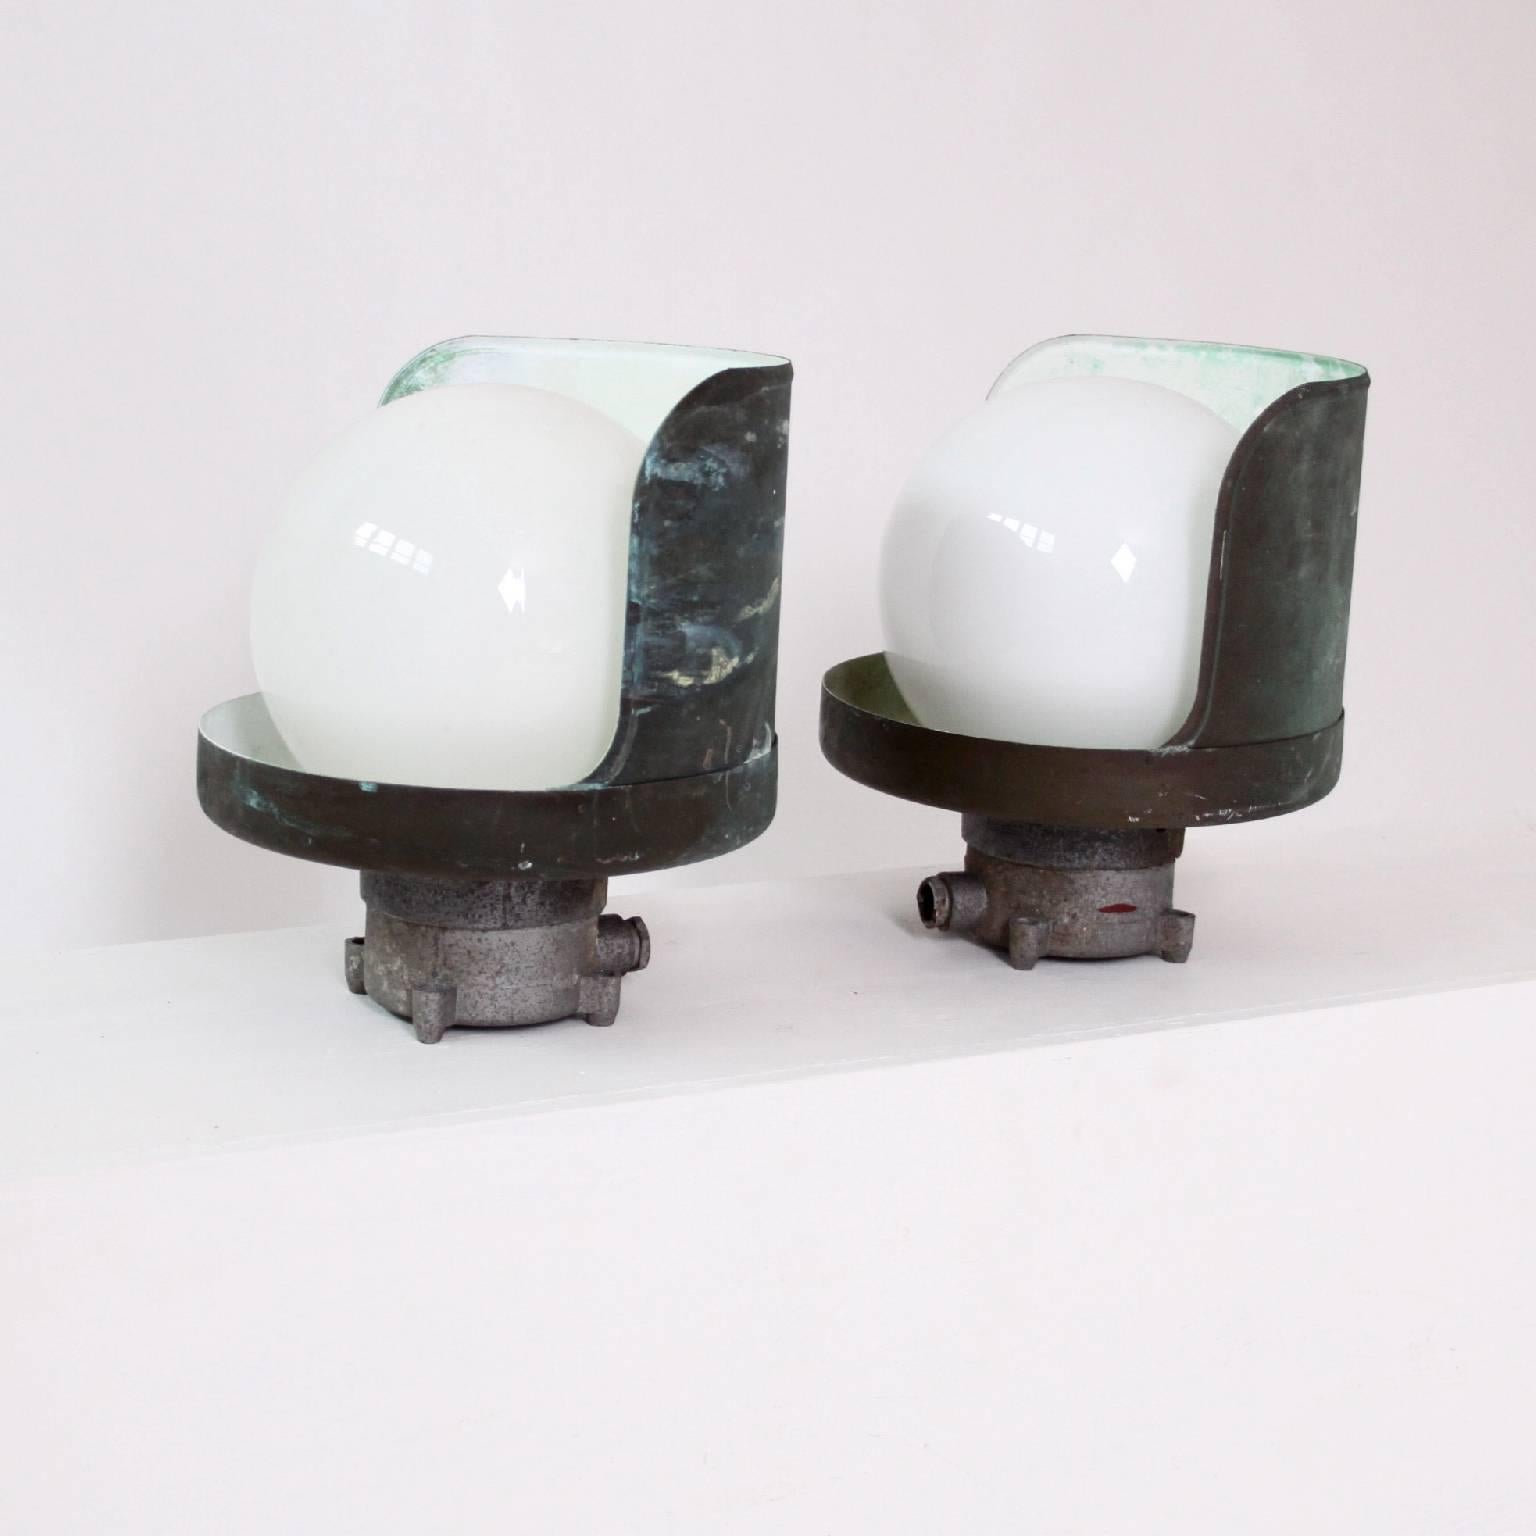 Finnish Pair of Original Paavo Tynell Wall Lamps in Copper with Beautiful Patina 1940s